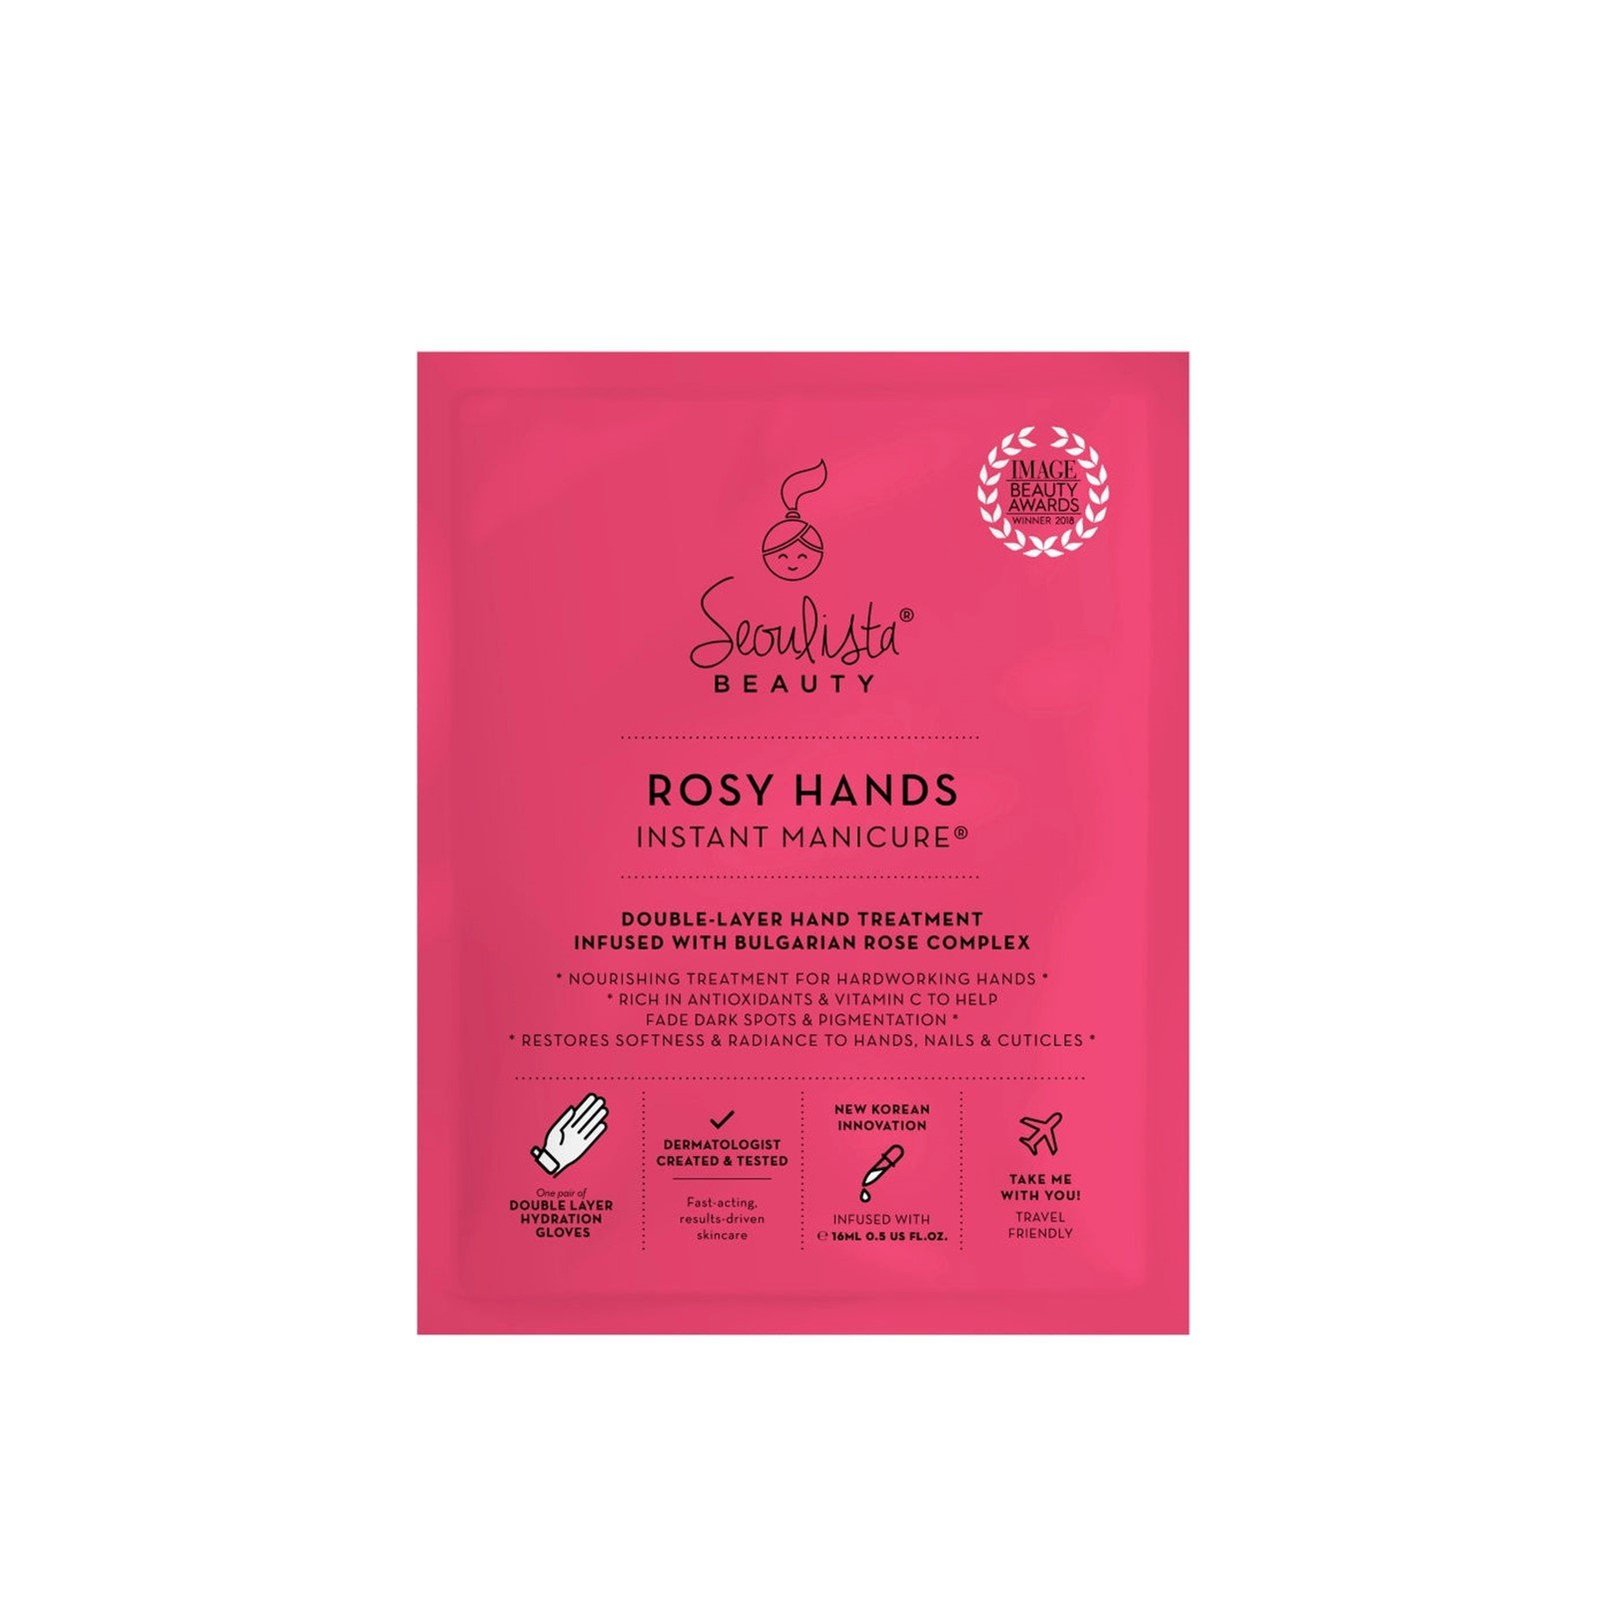 Seoulista Beauty Rosy Hands Instant Manicure Hand Sheet Mask 16ml